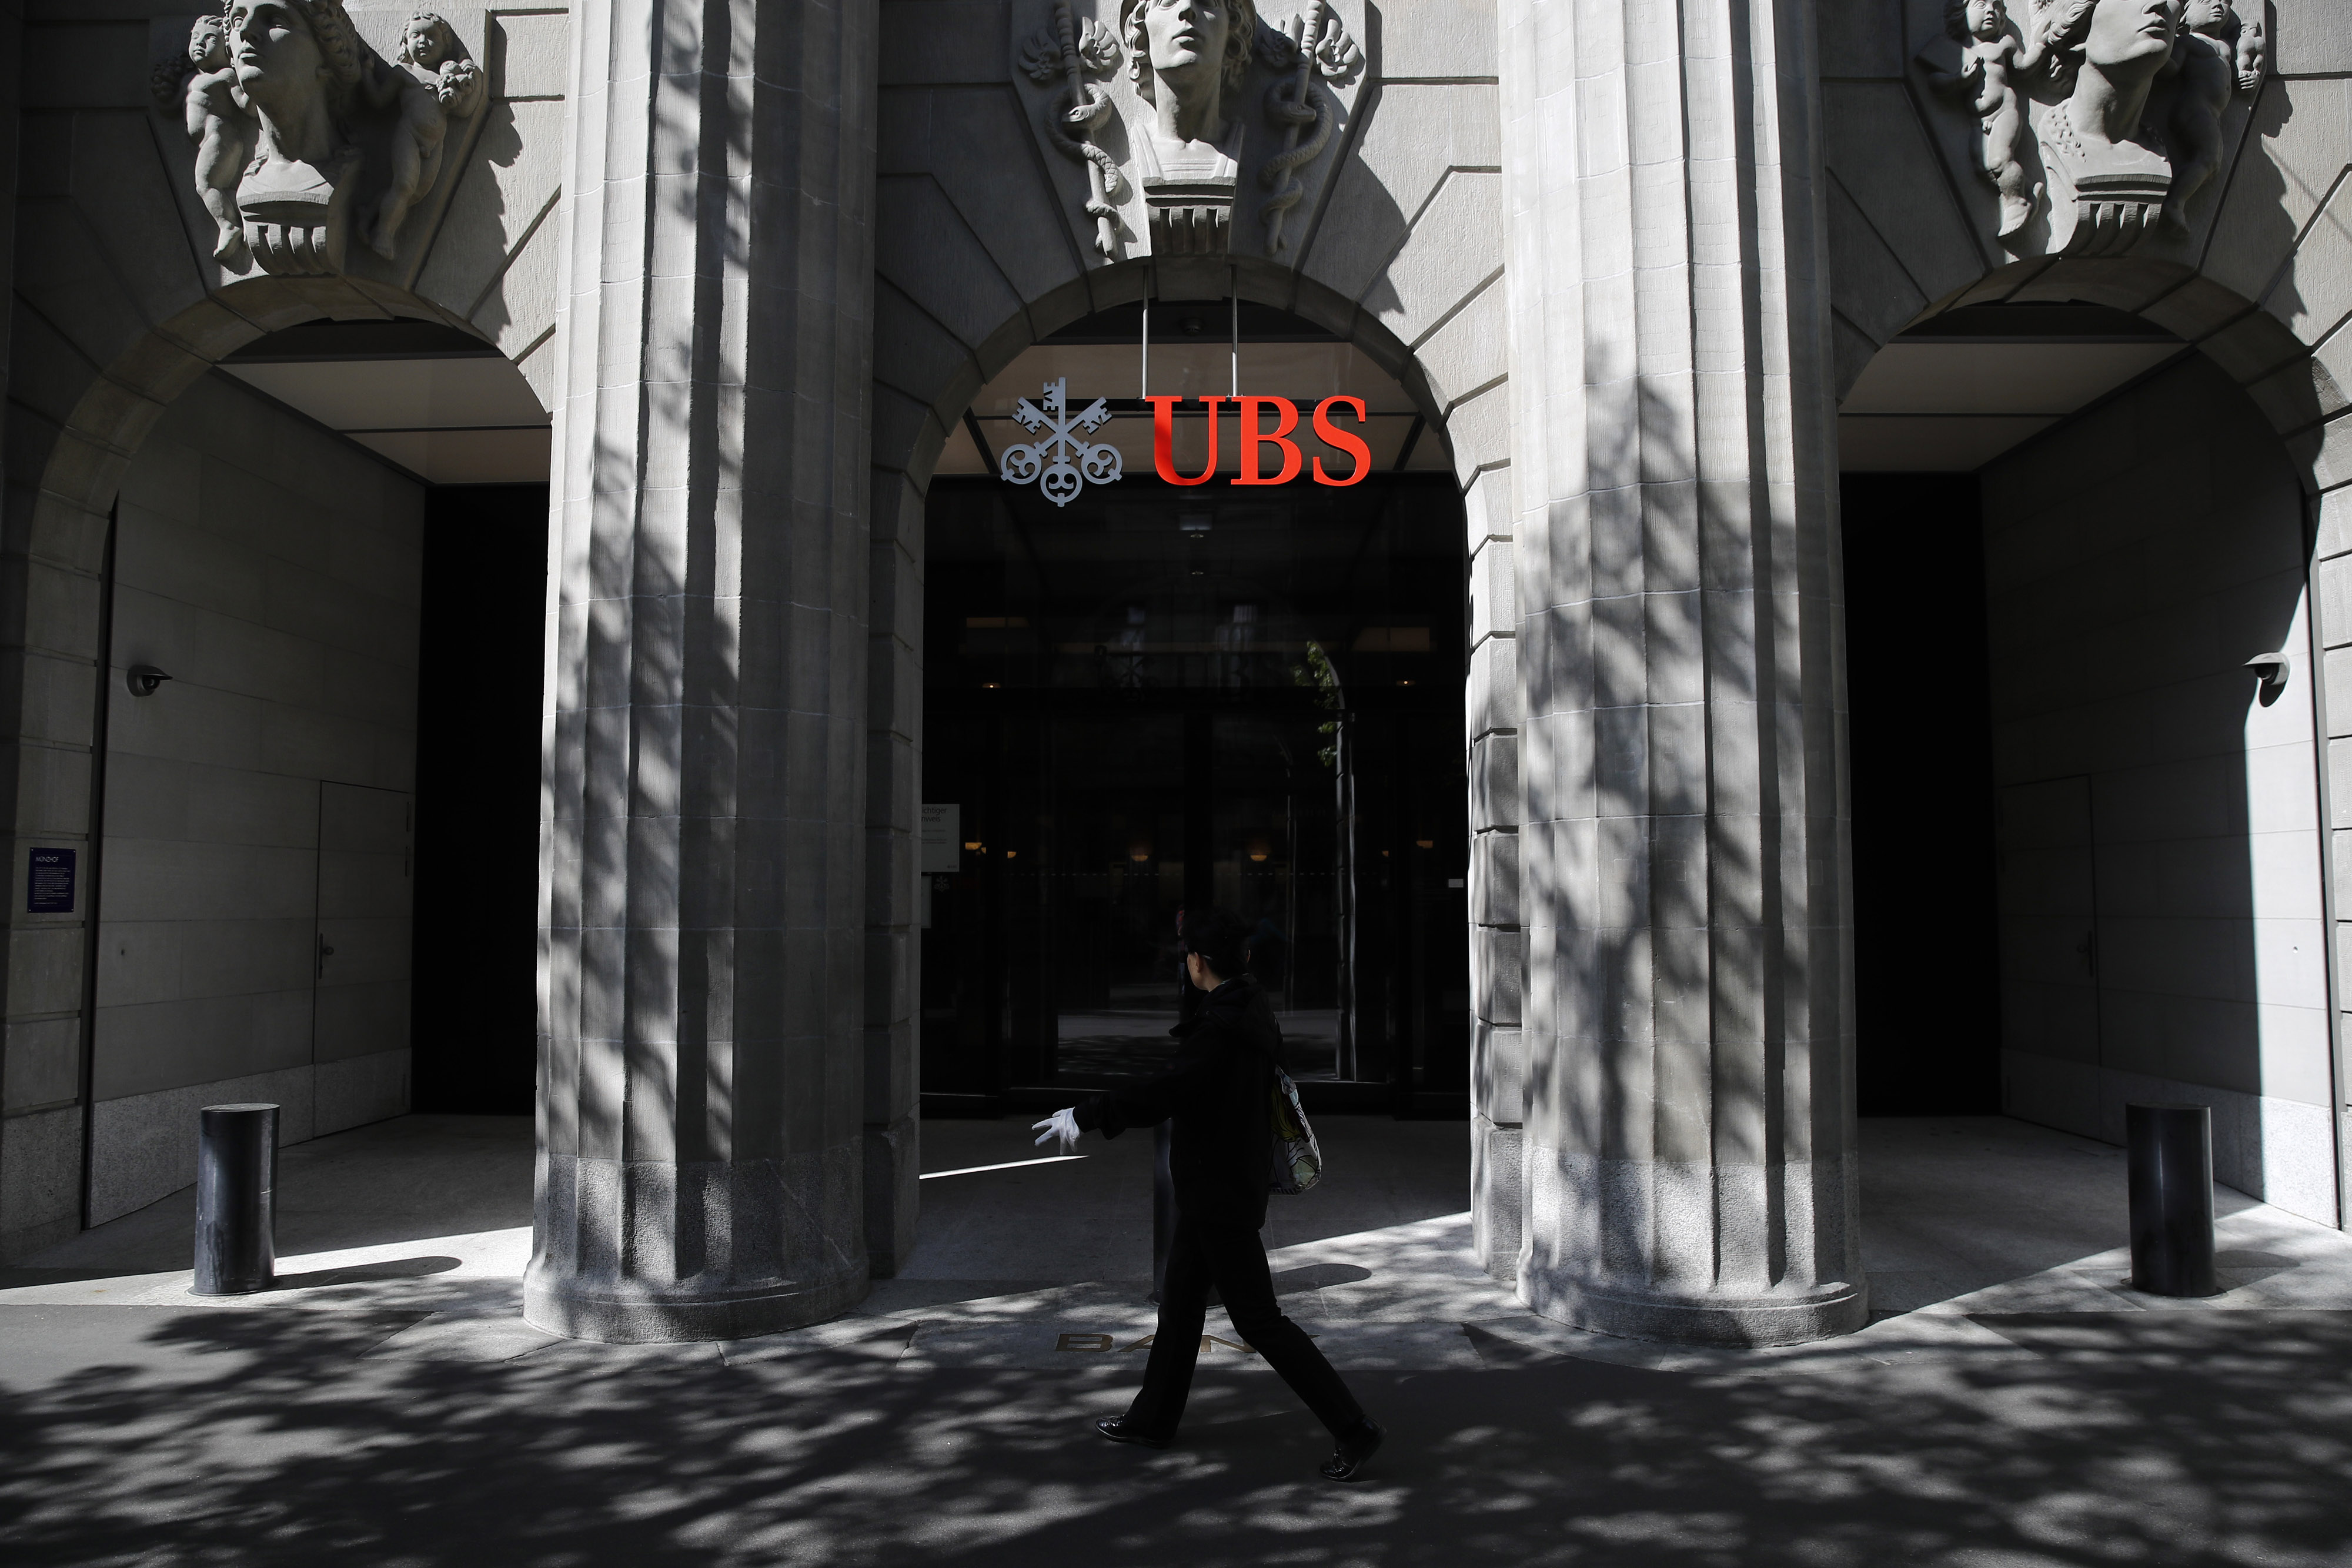 UBS is pushing deeper into financial technology as&nbsp;the coronavirus pandemic accelerates adoption of digital services.